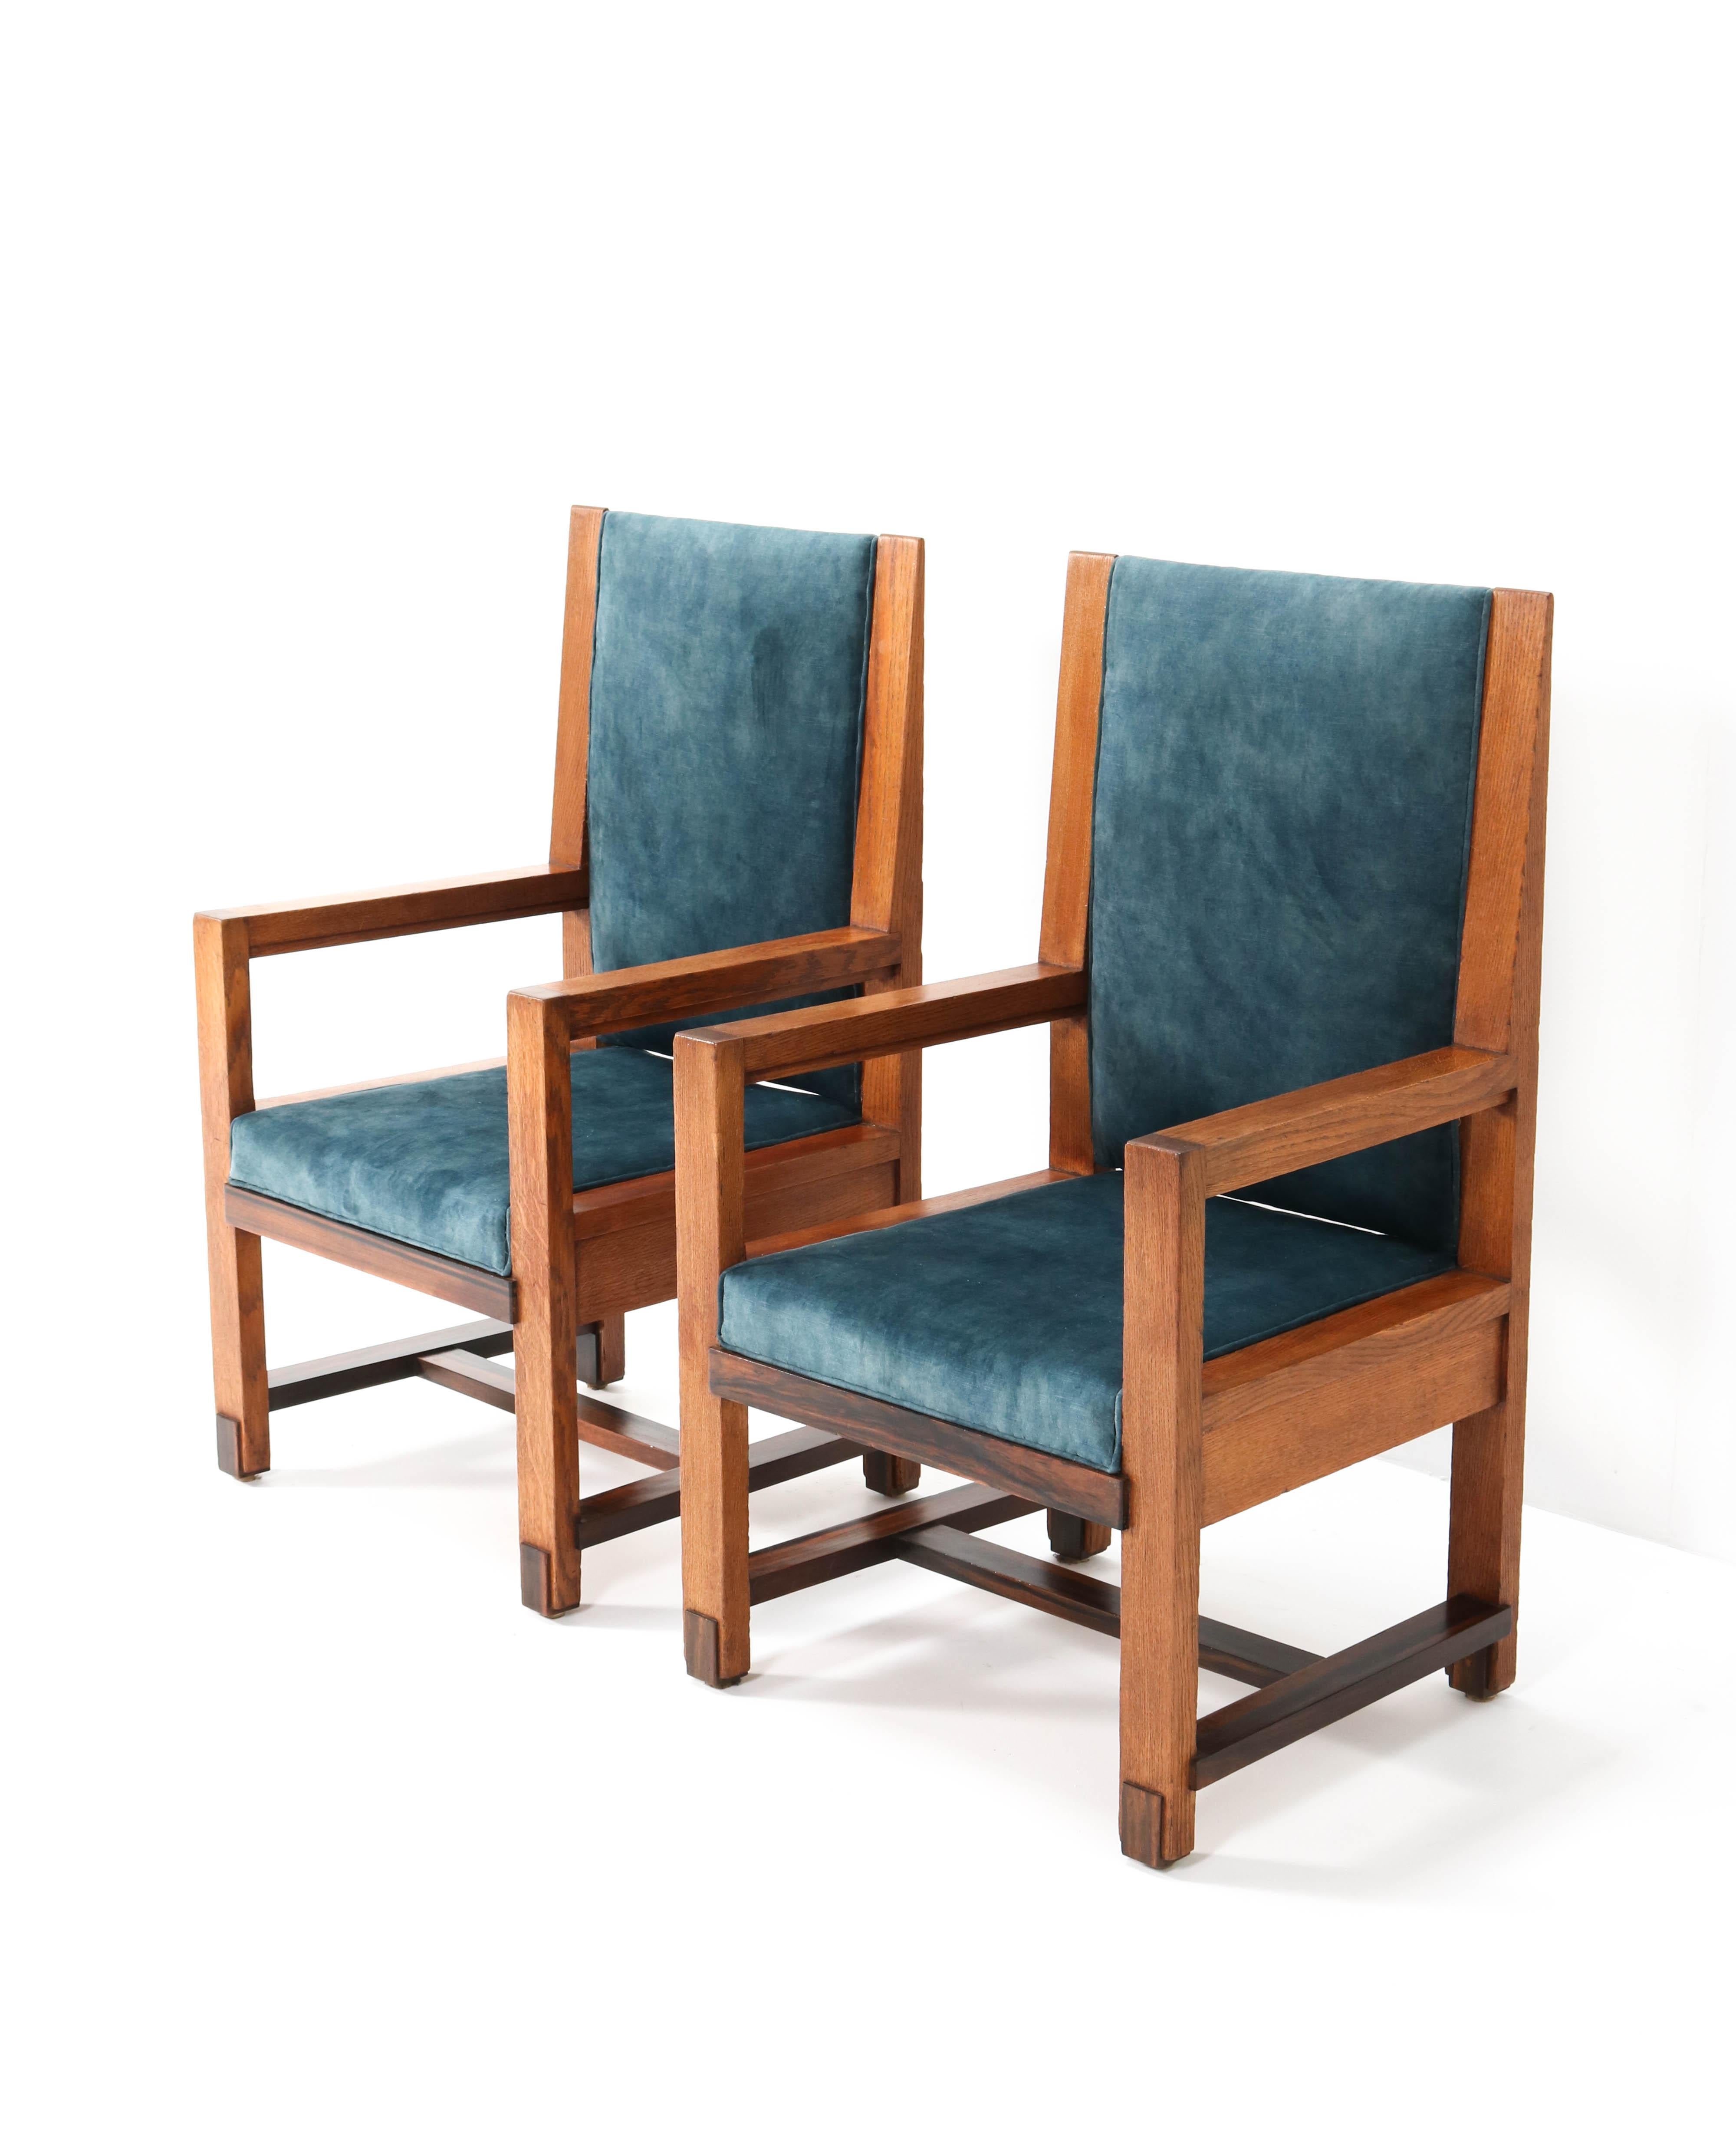 Early 20th Century Two Oak Art Deco Haagse School Armchairs by Henk Wouda for Pander, 1924